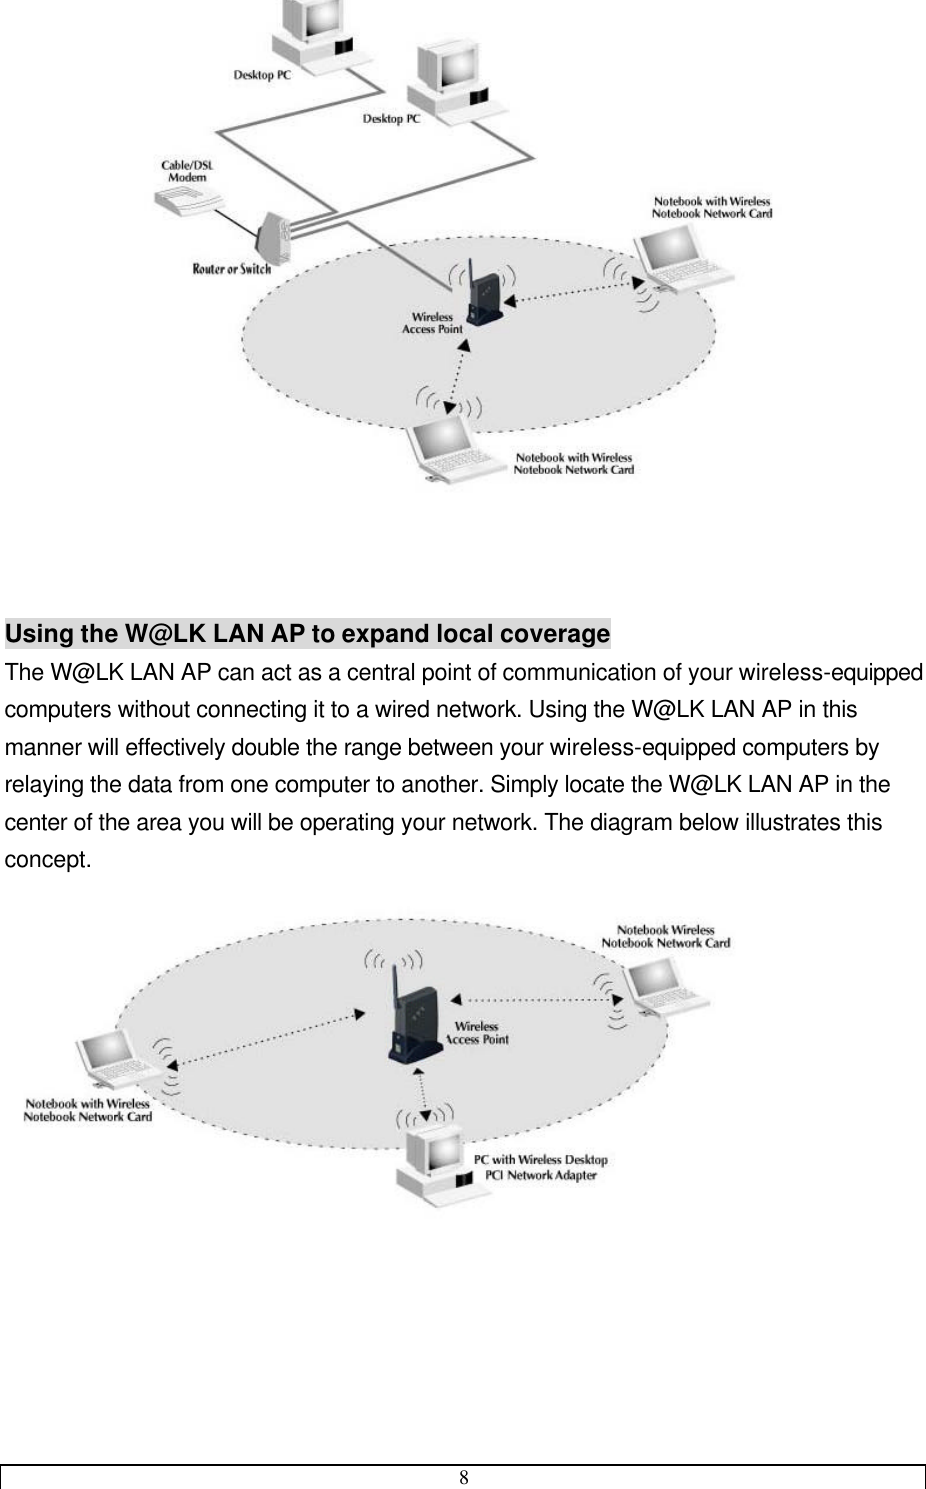 8     Installation Using the W@LK LAN AP to expand local coverage The W@LK LAN AP can act as a central point of communication of your wireless-equipped computers without connecting it to a wired network. Using the W@LK LAN AP in this manner will effectively double the range between your wireless-equipped computers by relaying the data from one computer to another. Simply locate the W@LK LAN AP in the center of the area you will be operating your network. The diagram below illustrates this concept.   